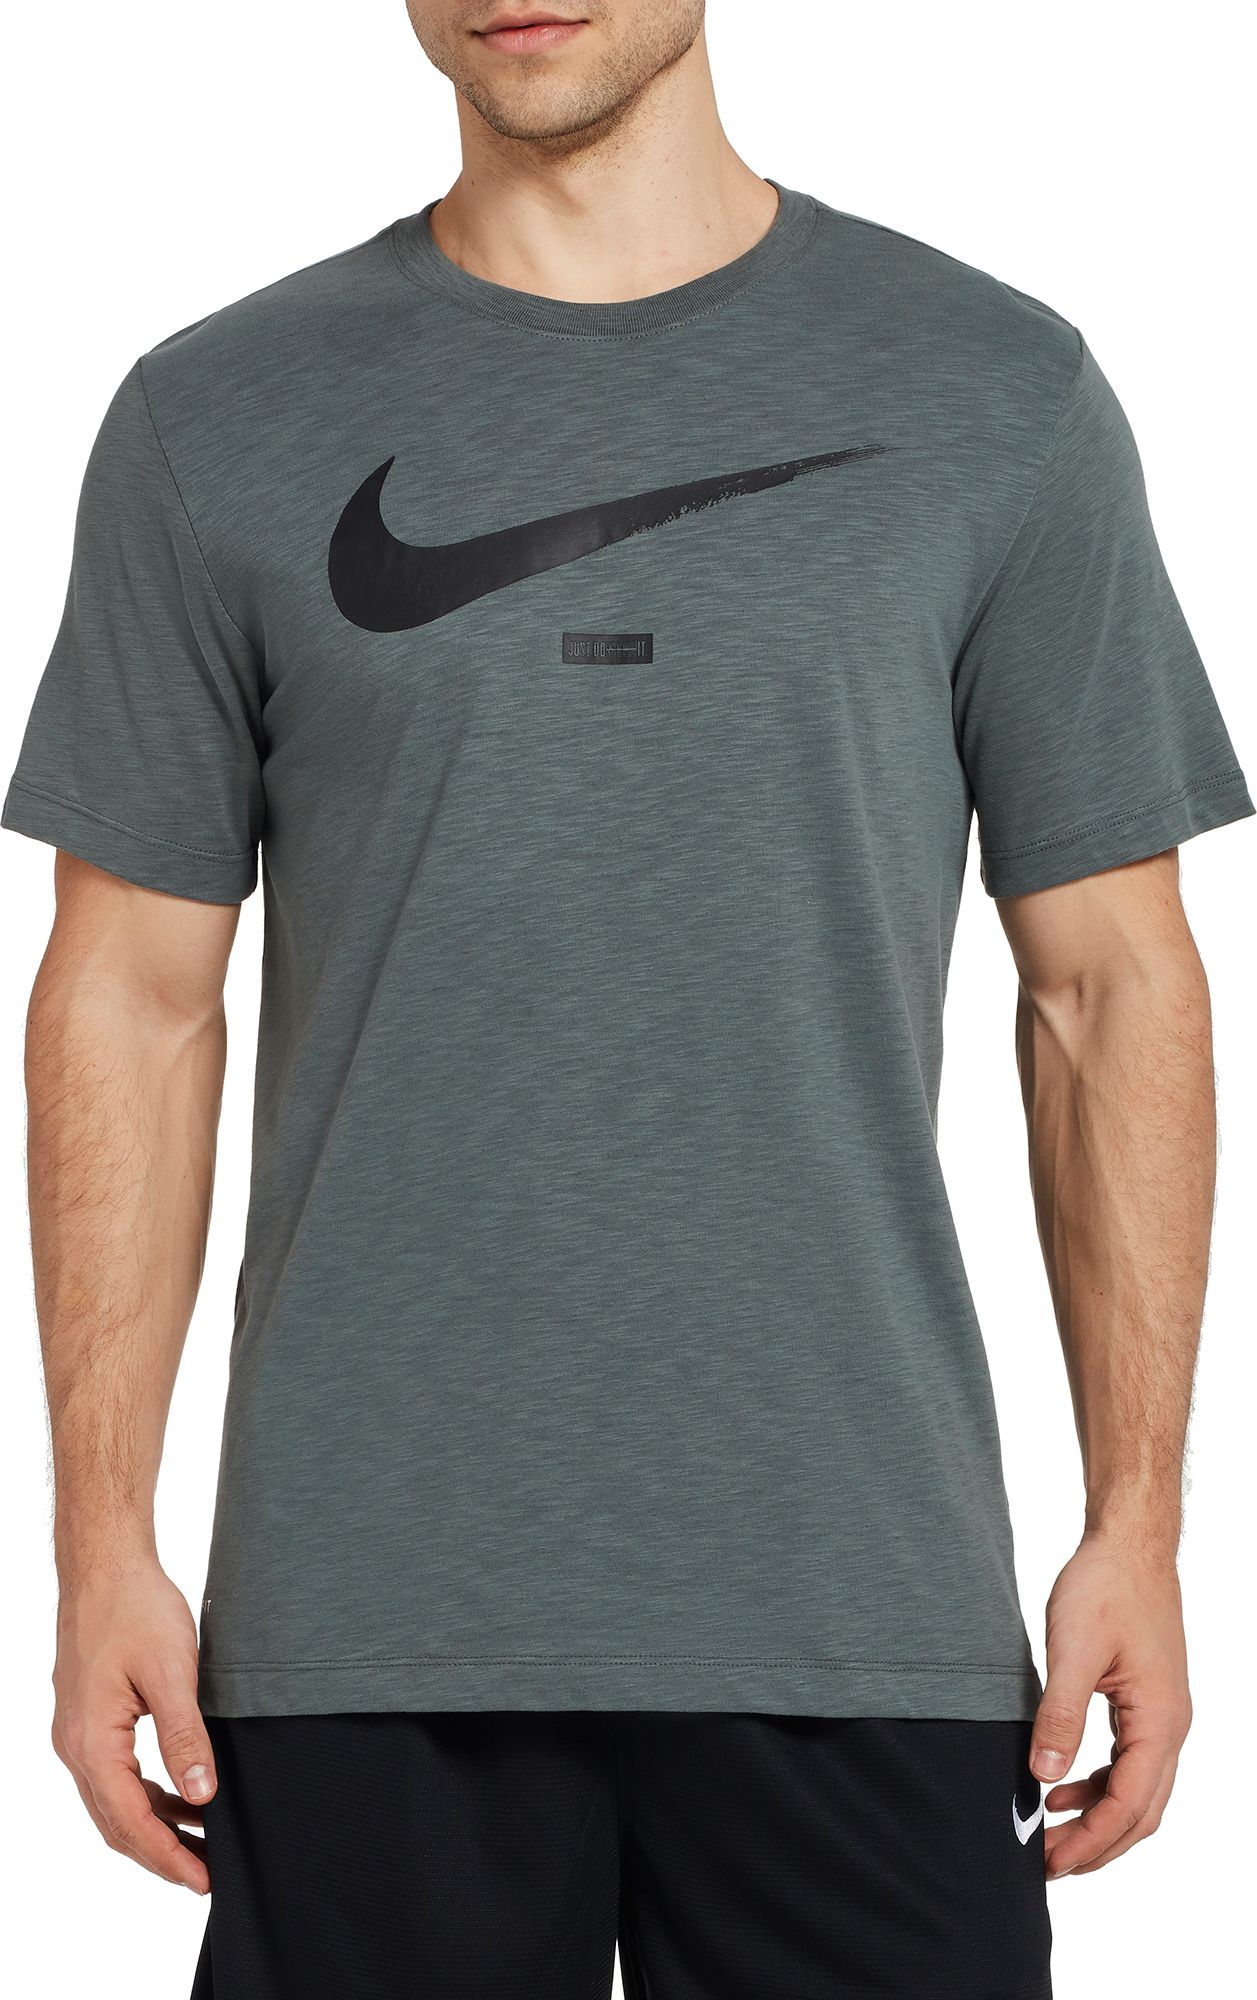 Nike Men's Dry Just Don't Quit Swoosh Graphic Tee - .97